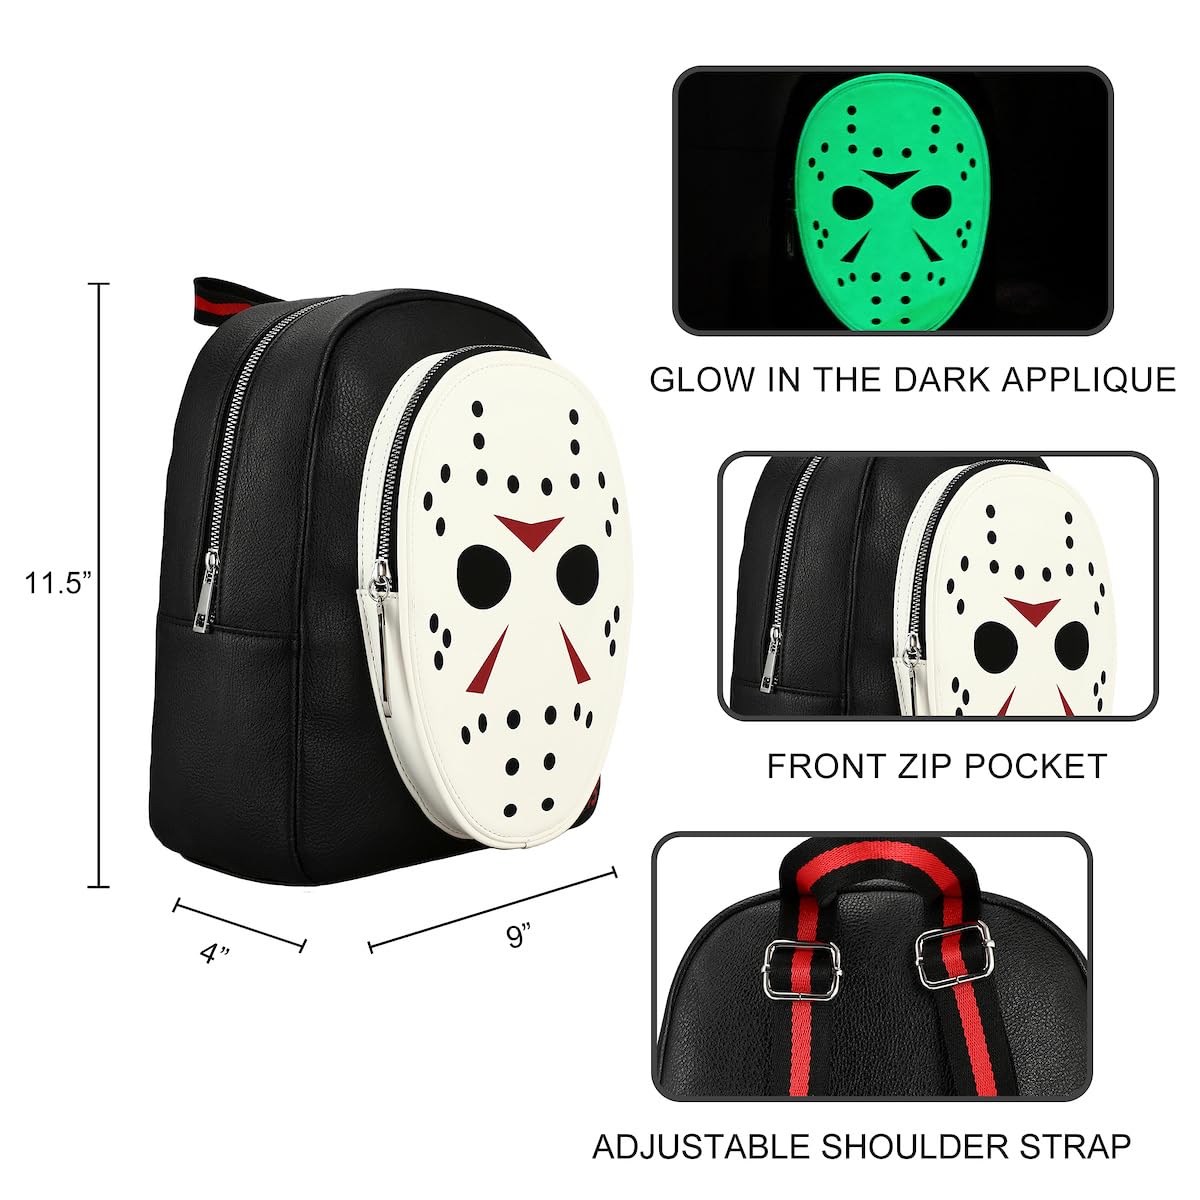 Friday the 13th Mini Backpack with Glow In The Dark Jason Mask